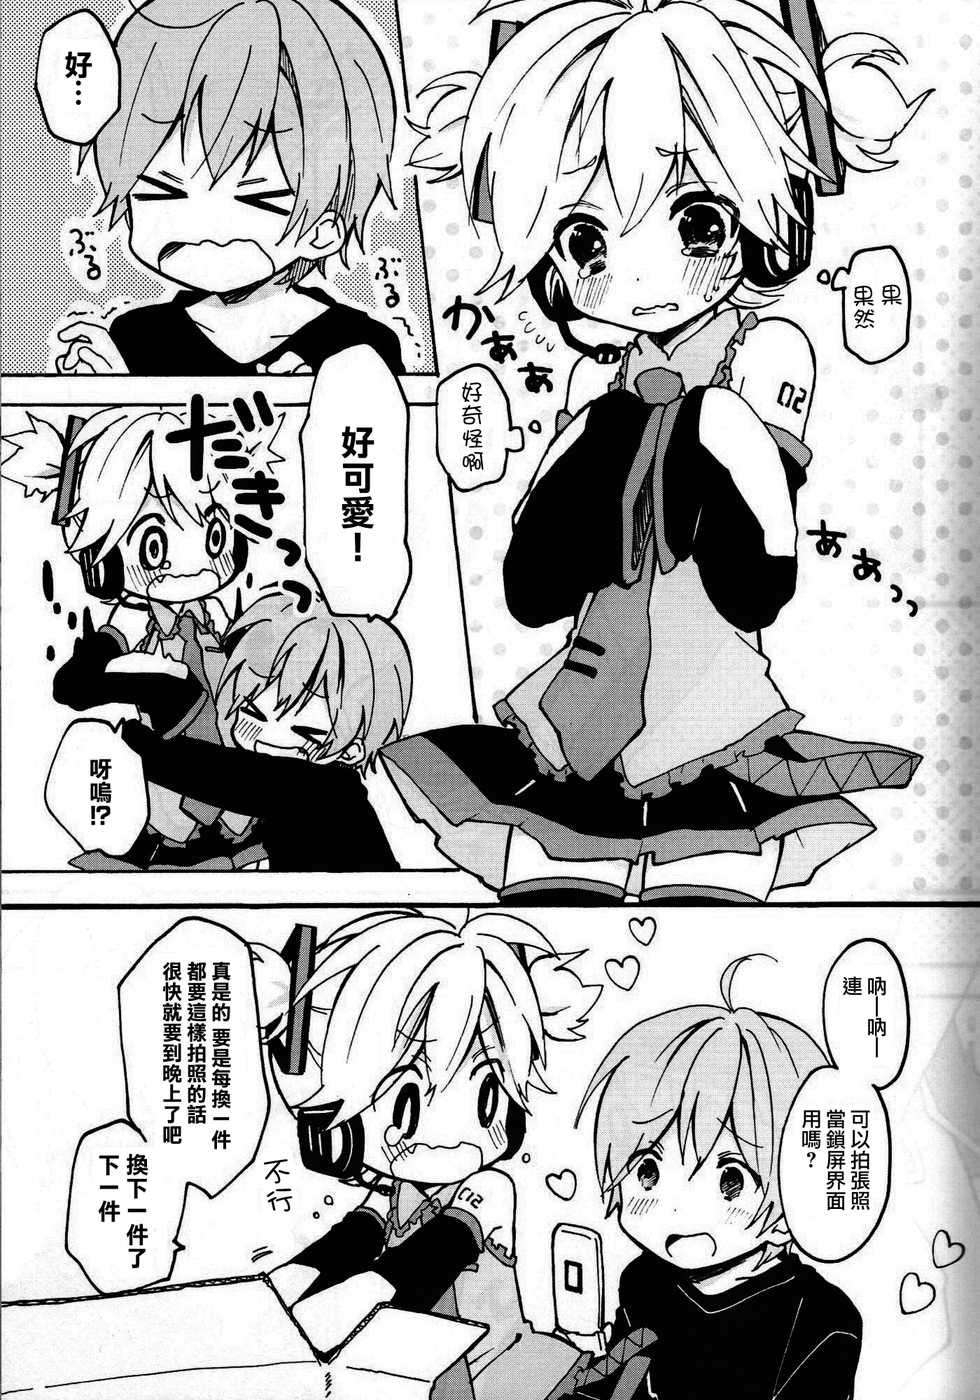 [Hey You! (Non)] Len-kun to Asobou! (VOCALOID) [Chinese] [瑞树汉化组] - Page 8